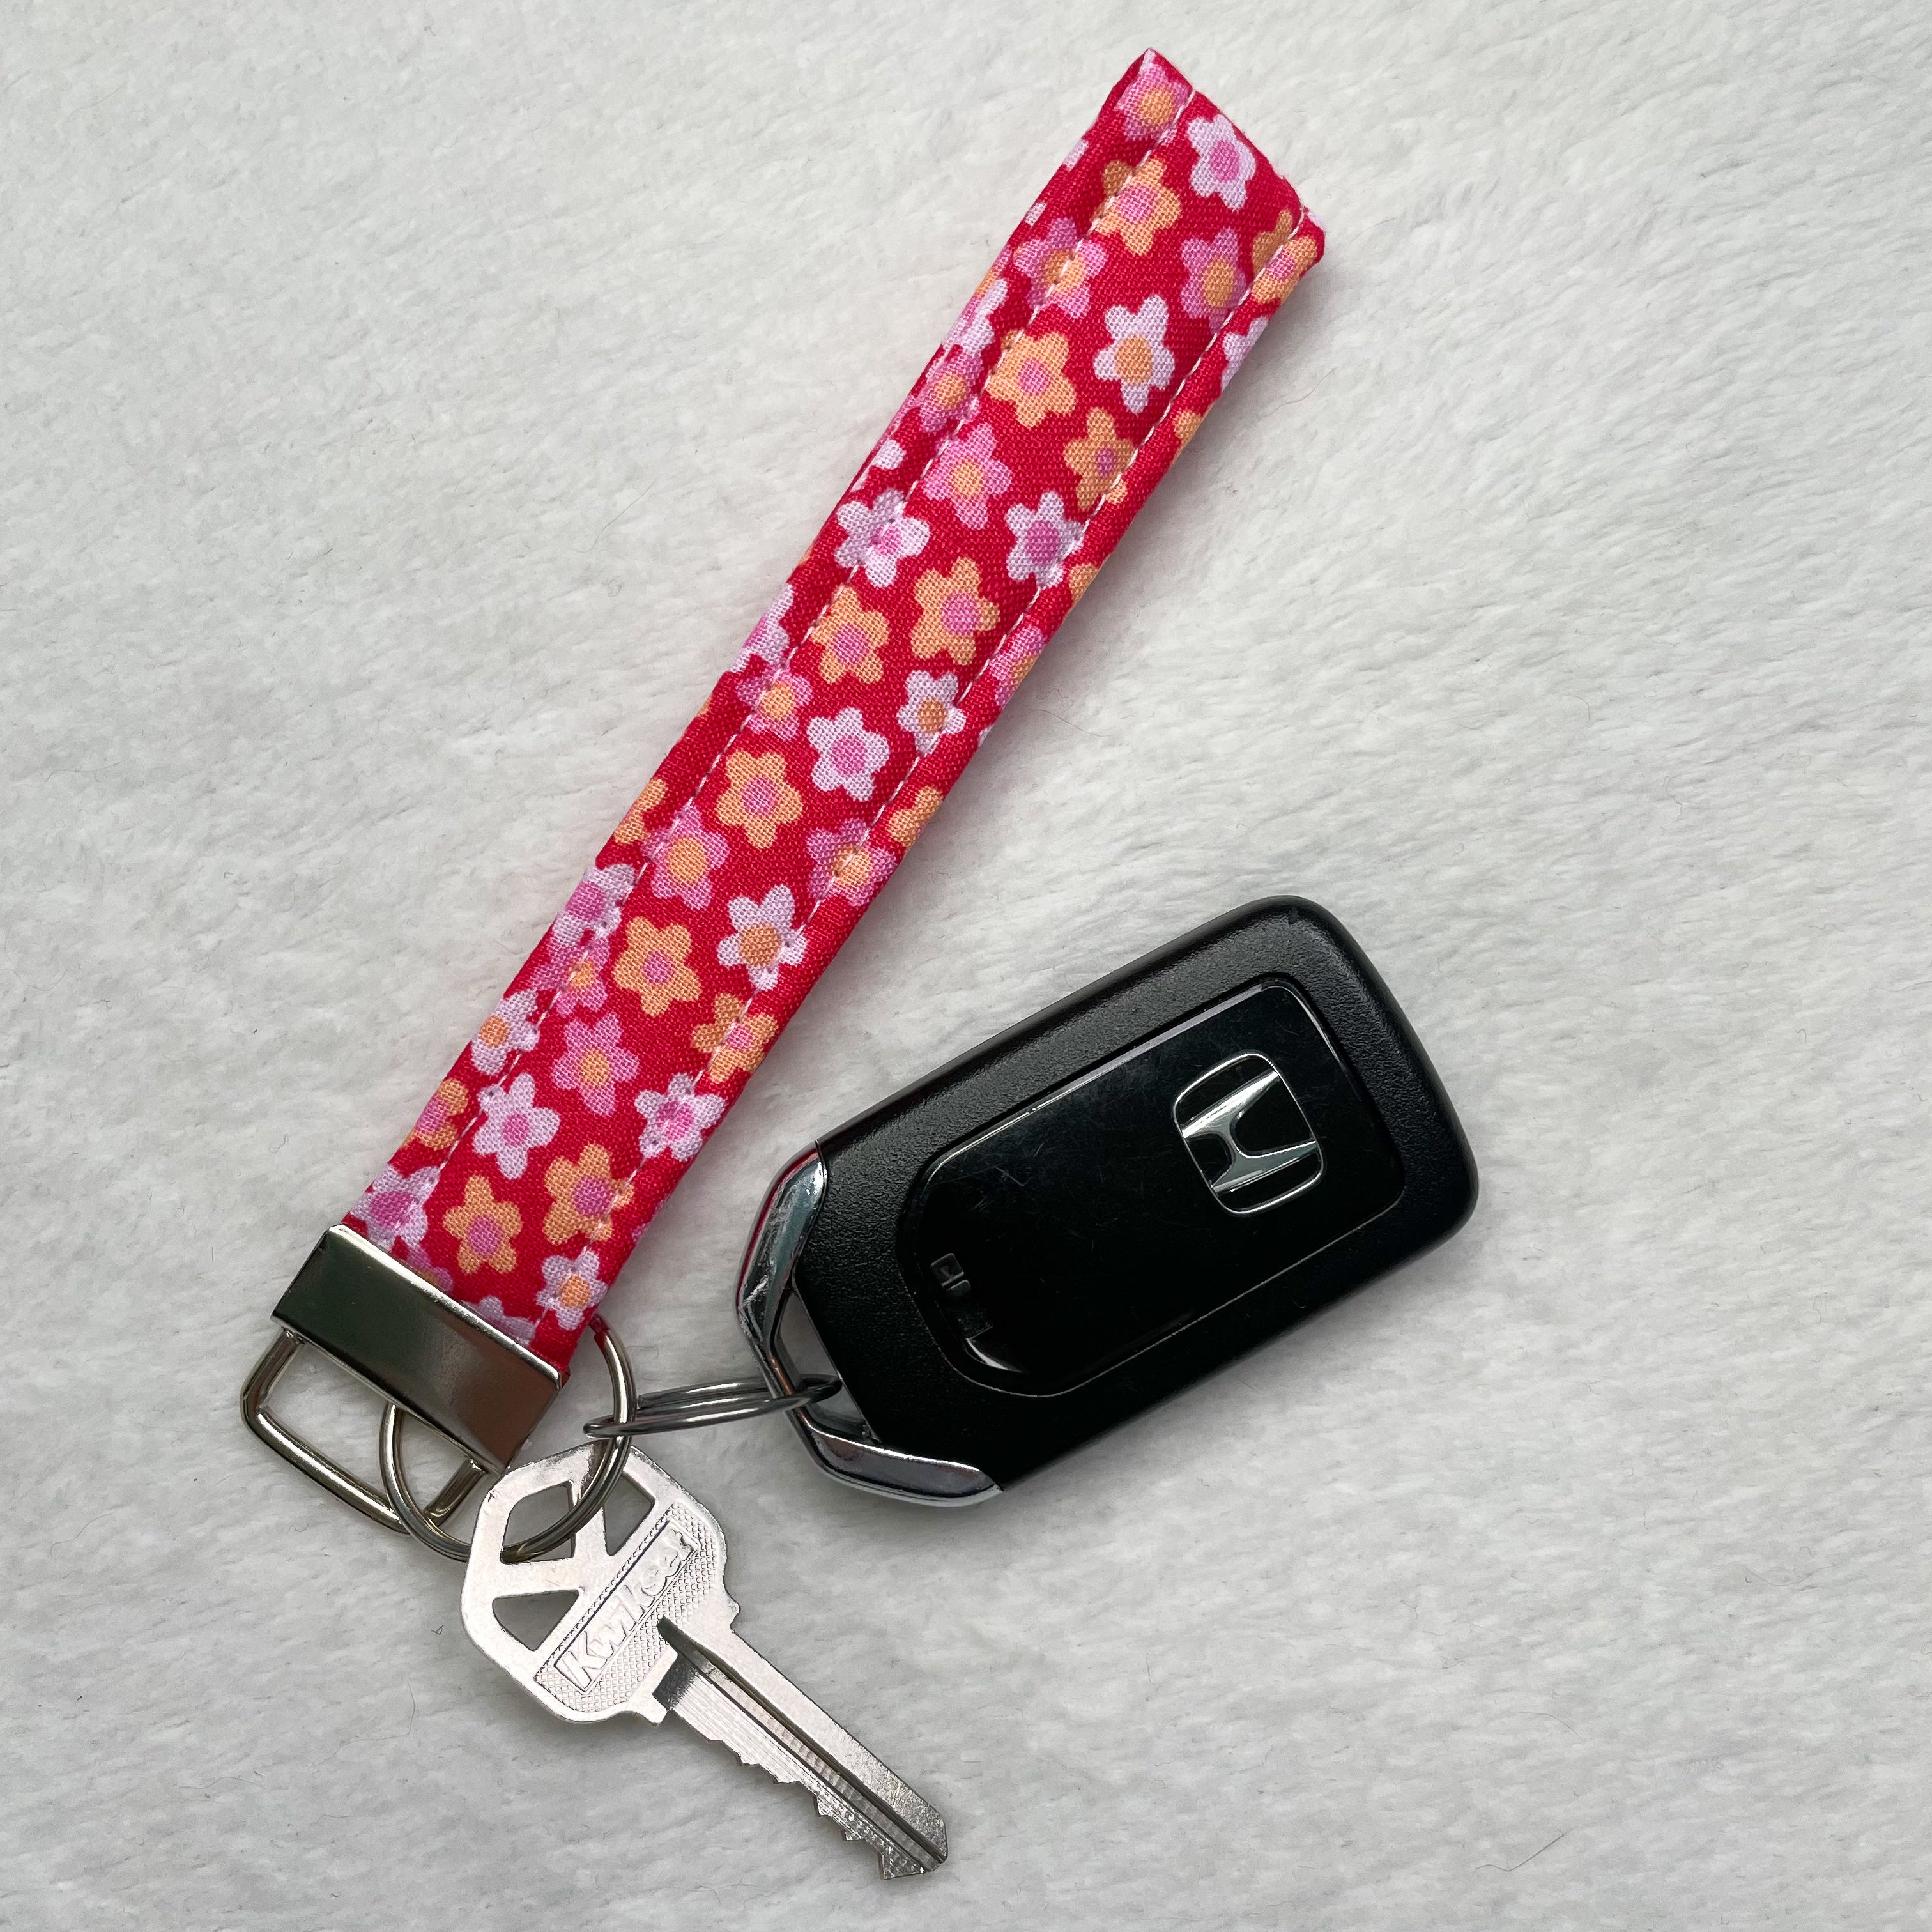 Jules Products Wristlet Key Chain Fob Be Nice